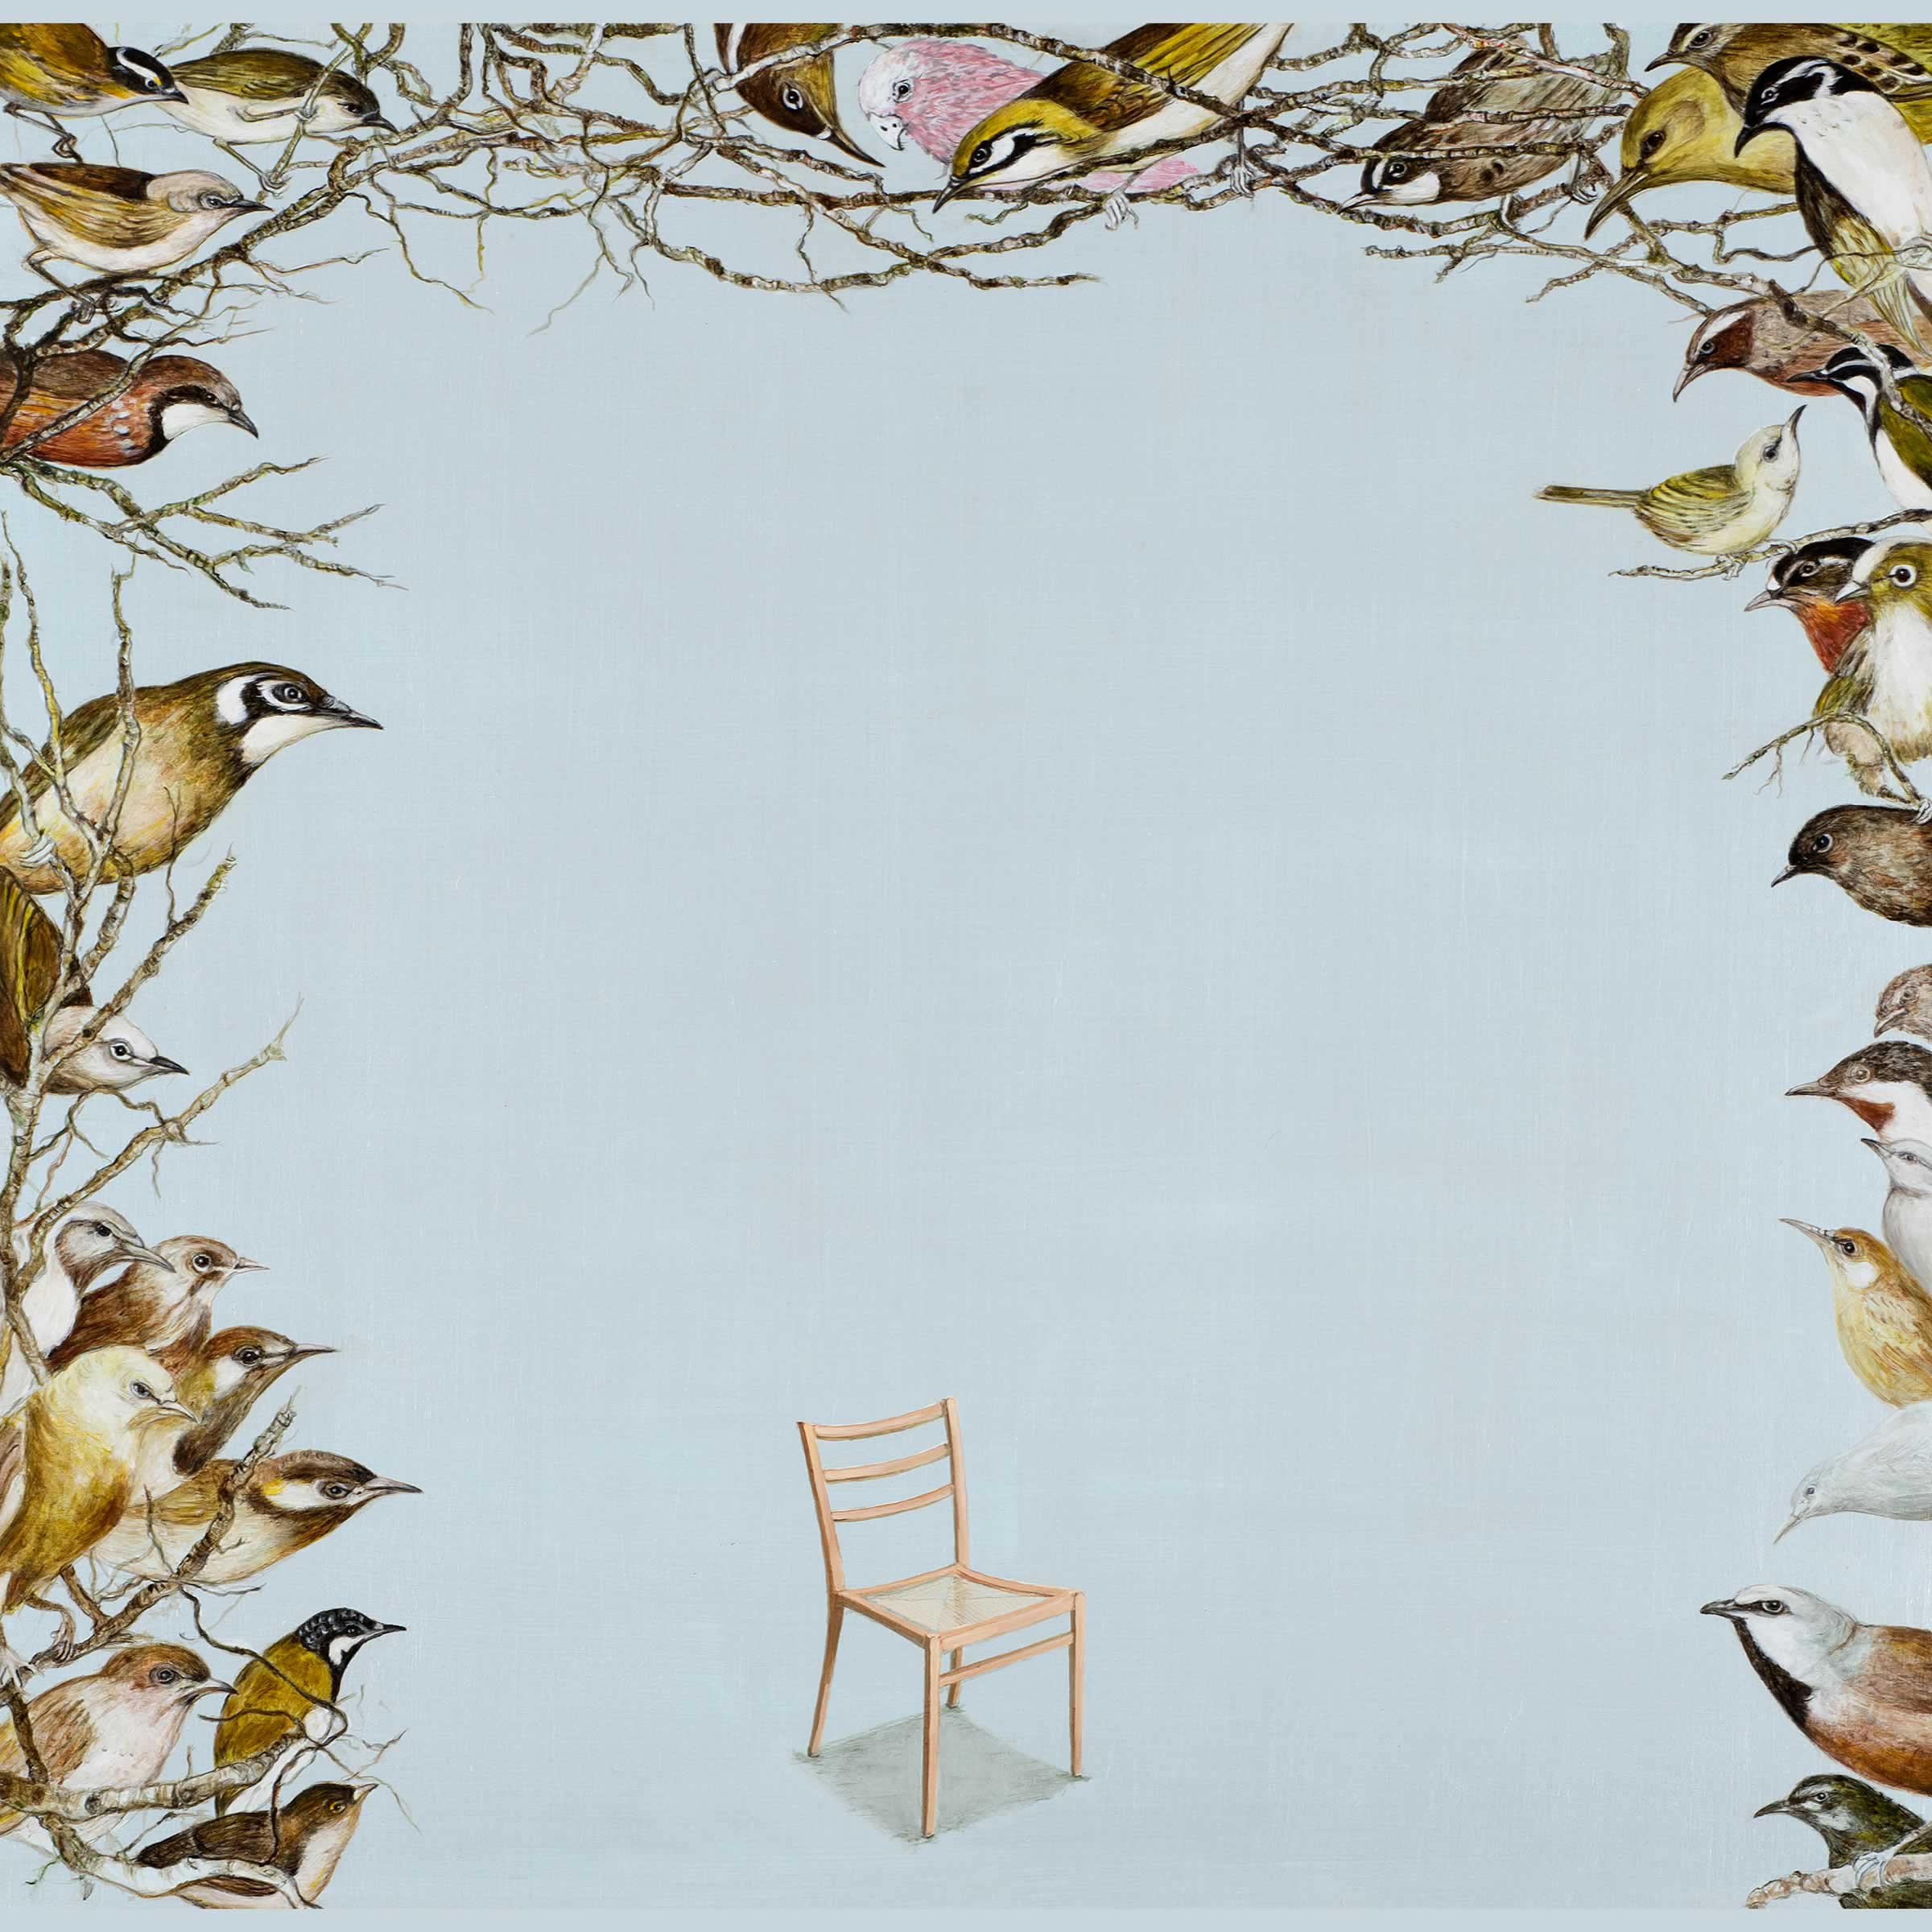 Image of Helen Wright’s painting “Their garden, their chair” showing a simple wooden chair against a light blue background, with Australian birds framing the top and two sides of the blue.